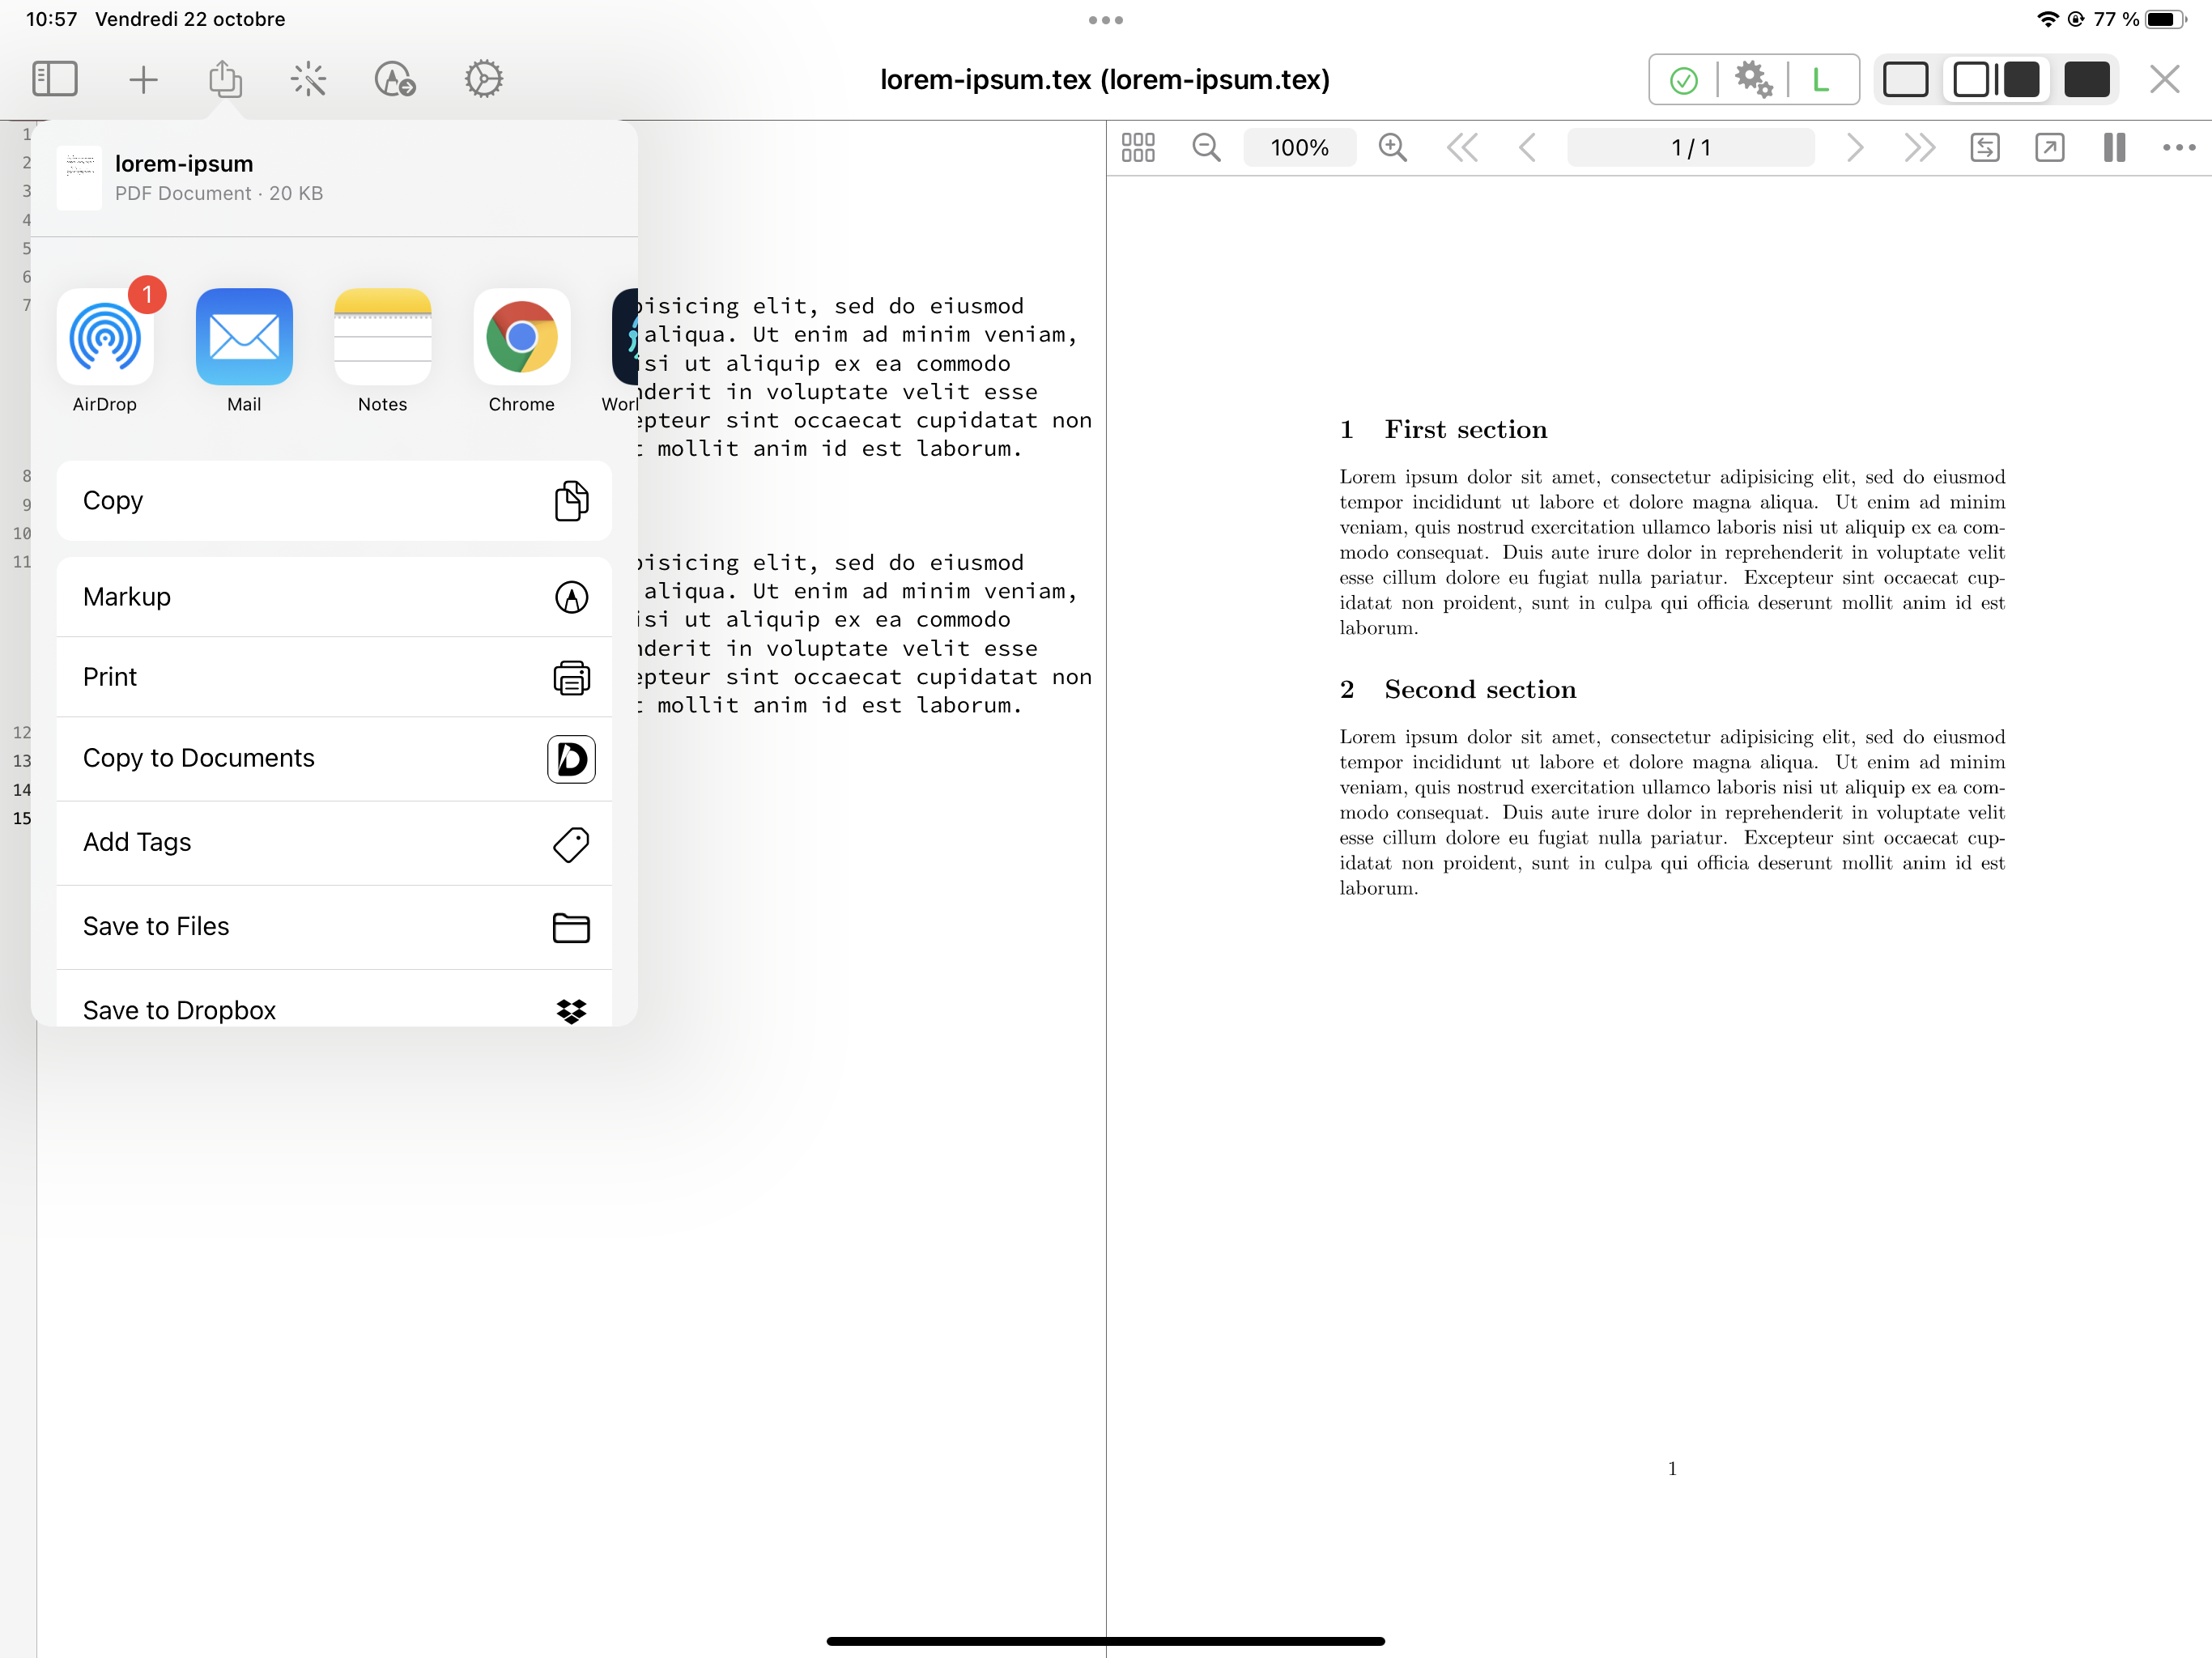 docs/apps/workspace/document-viewer/printing/ios/share-dialogue.png